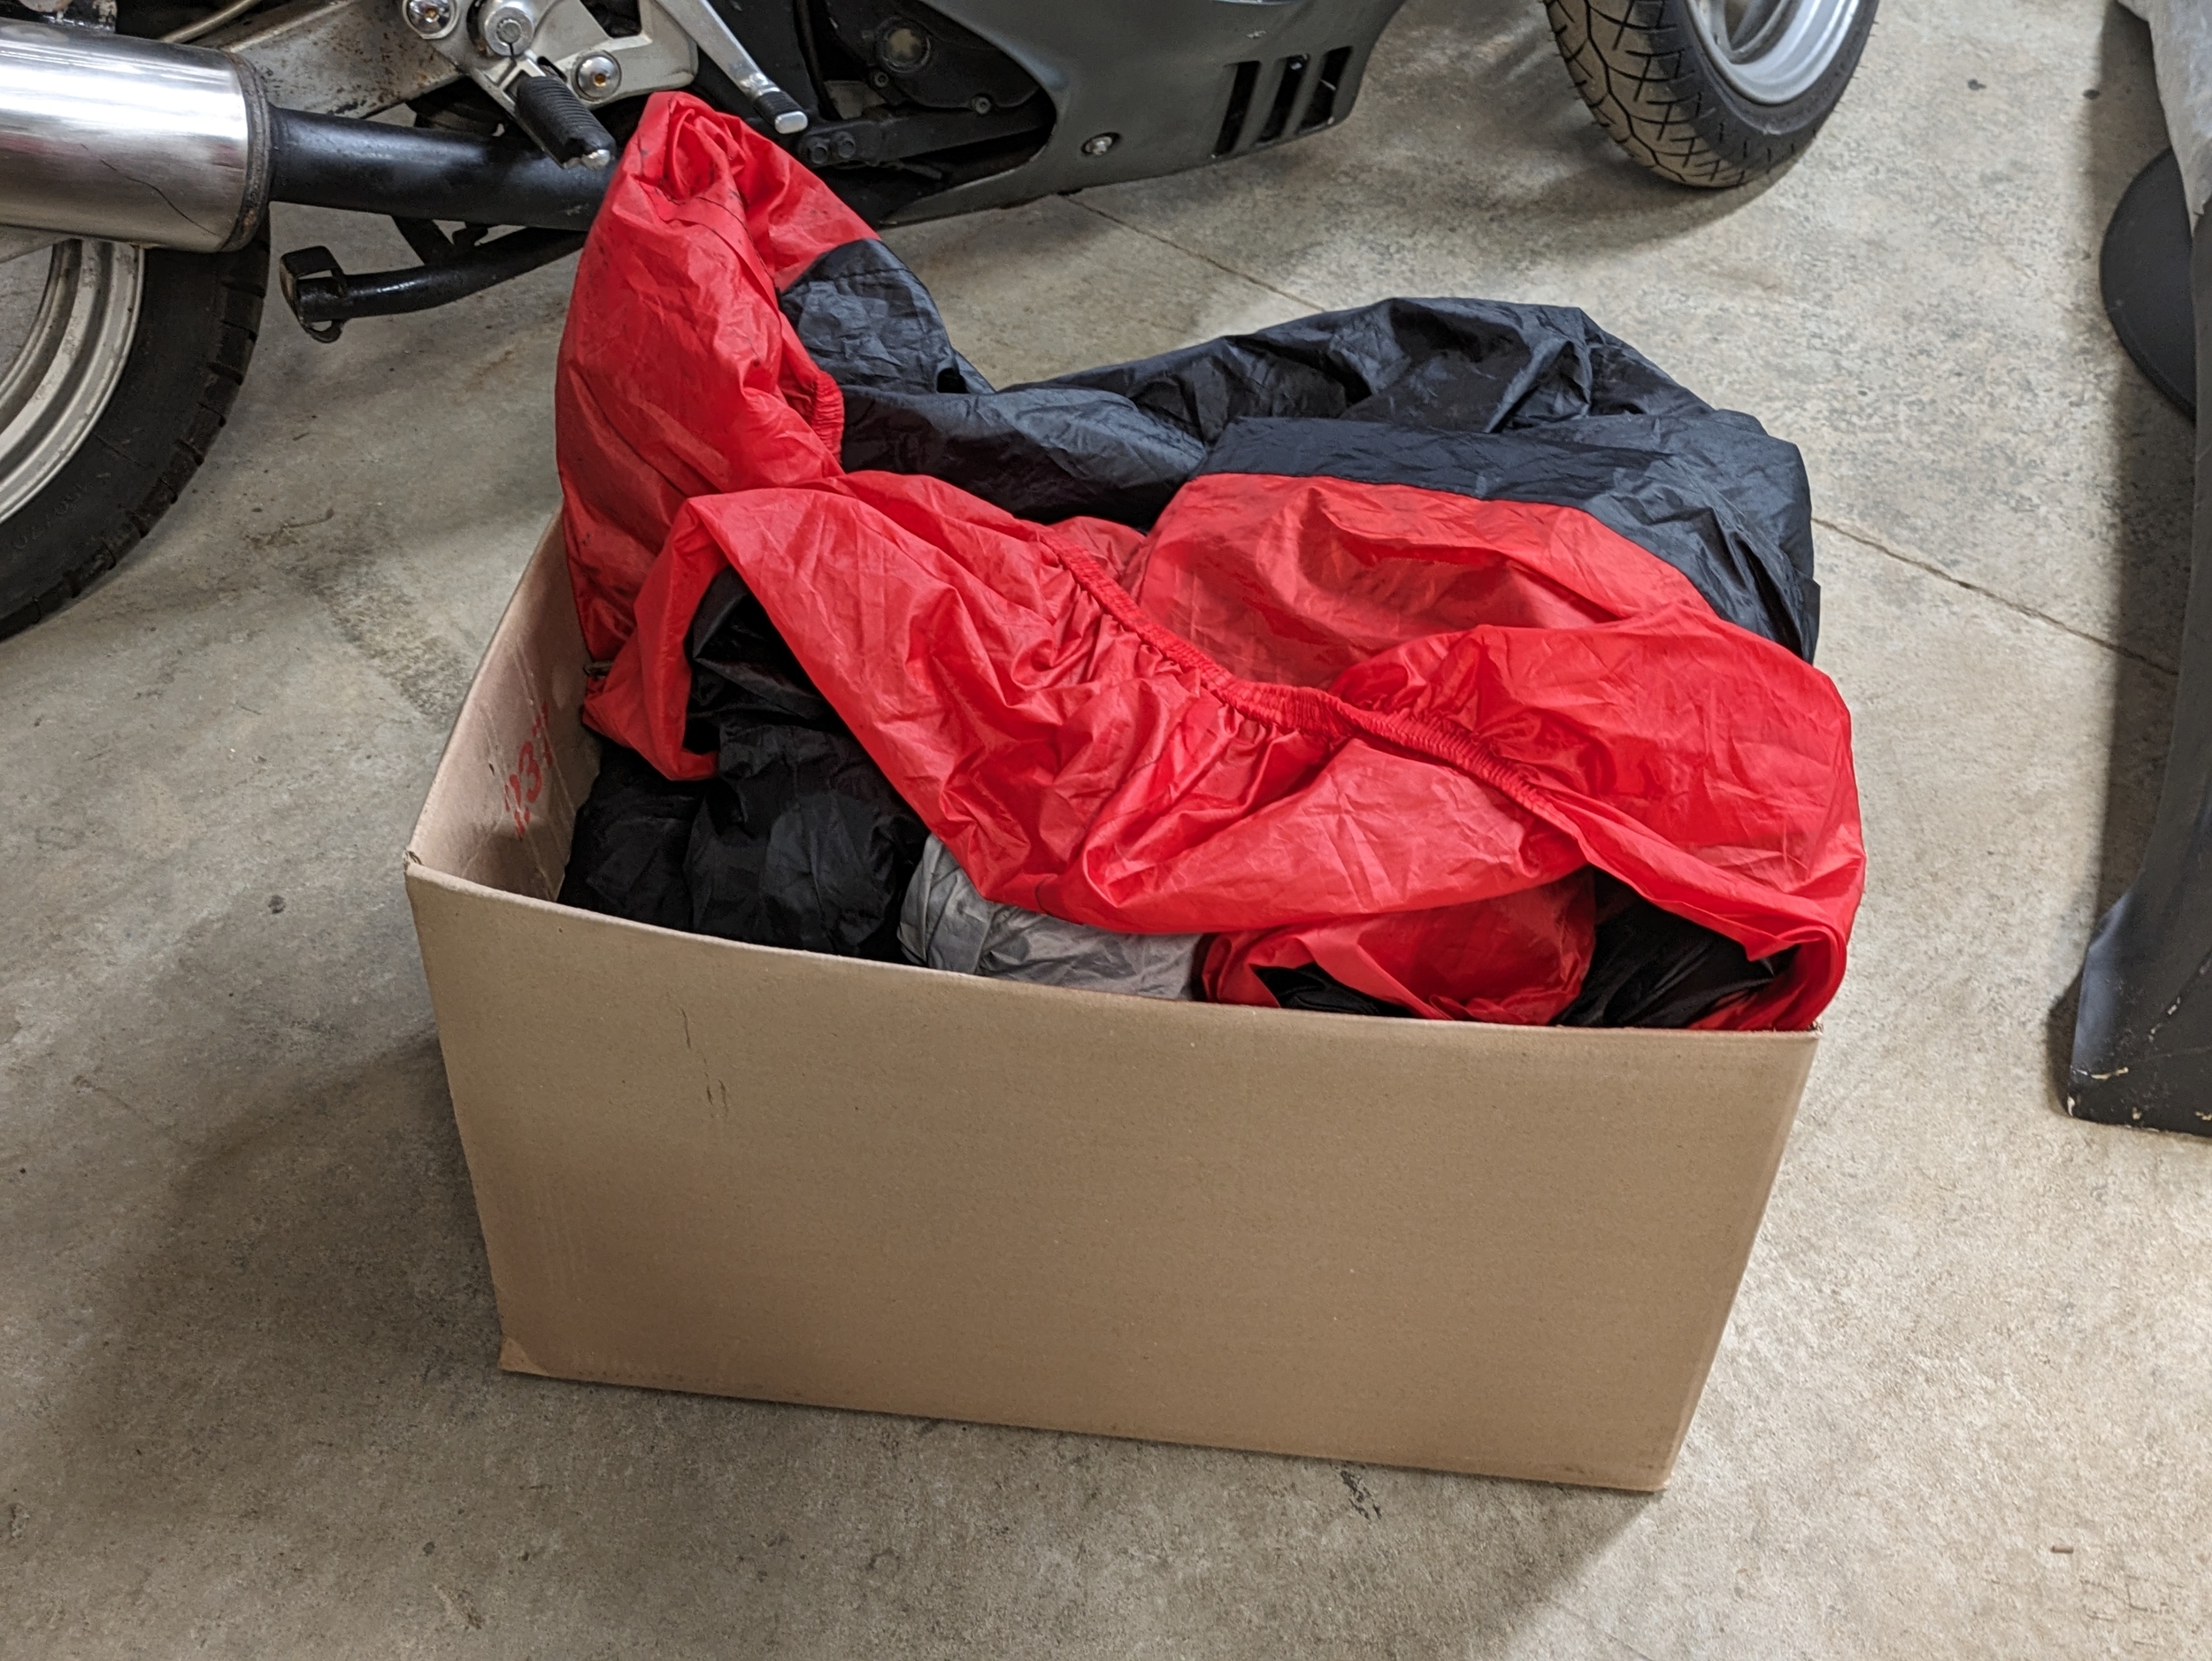 A box of motorbike covers